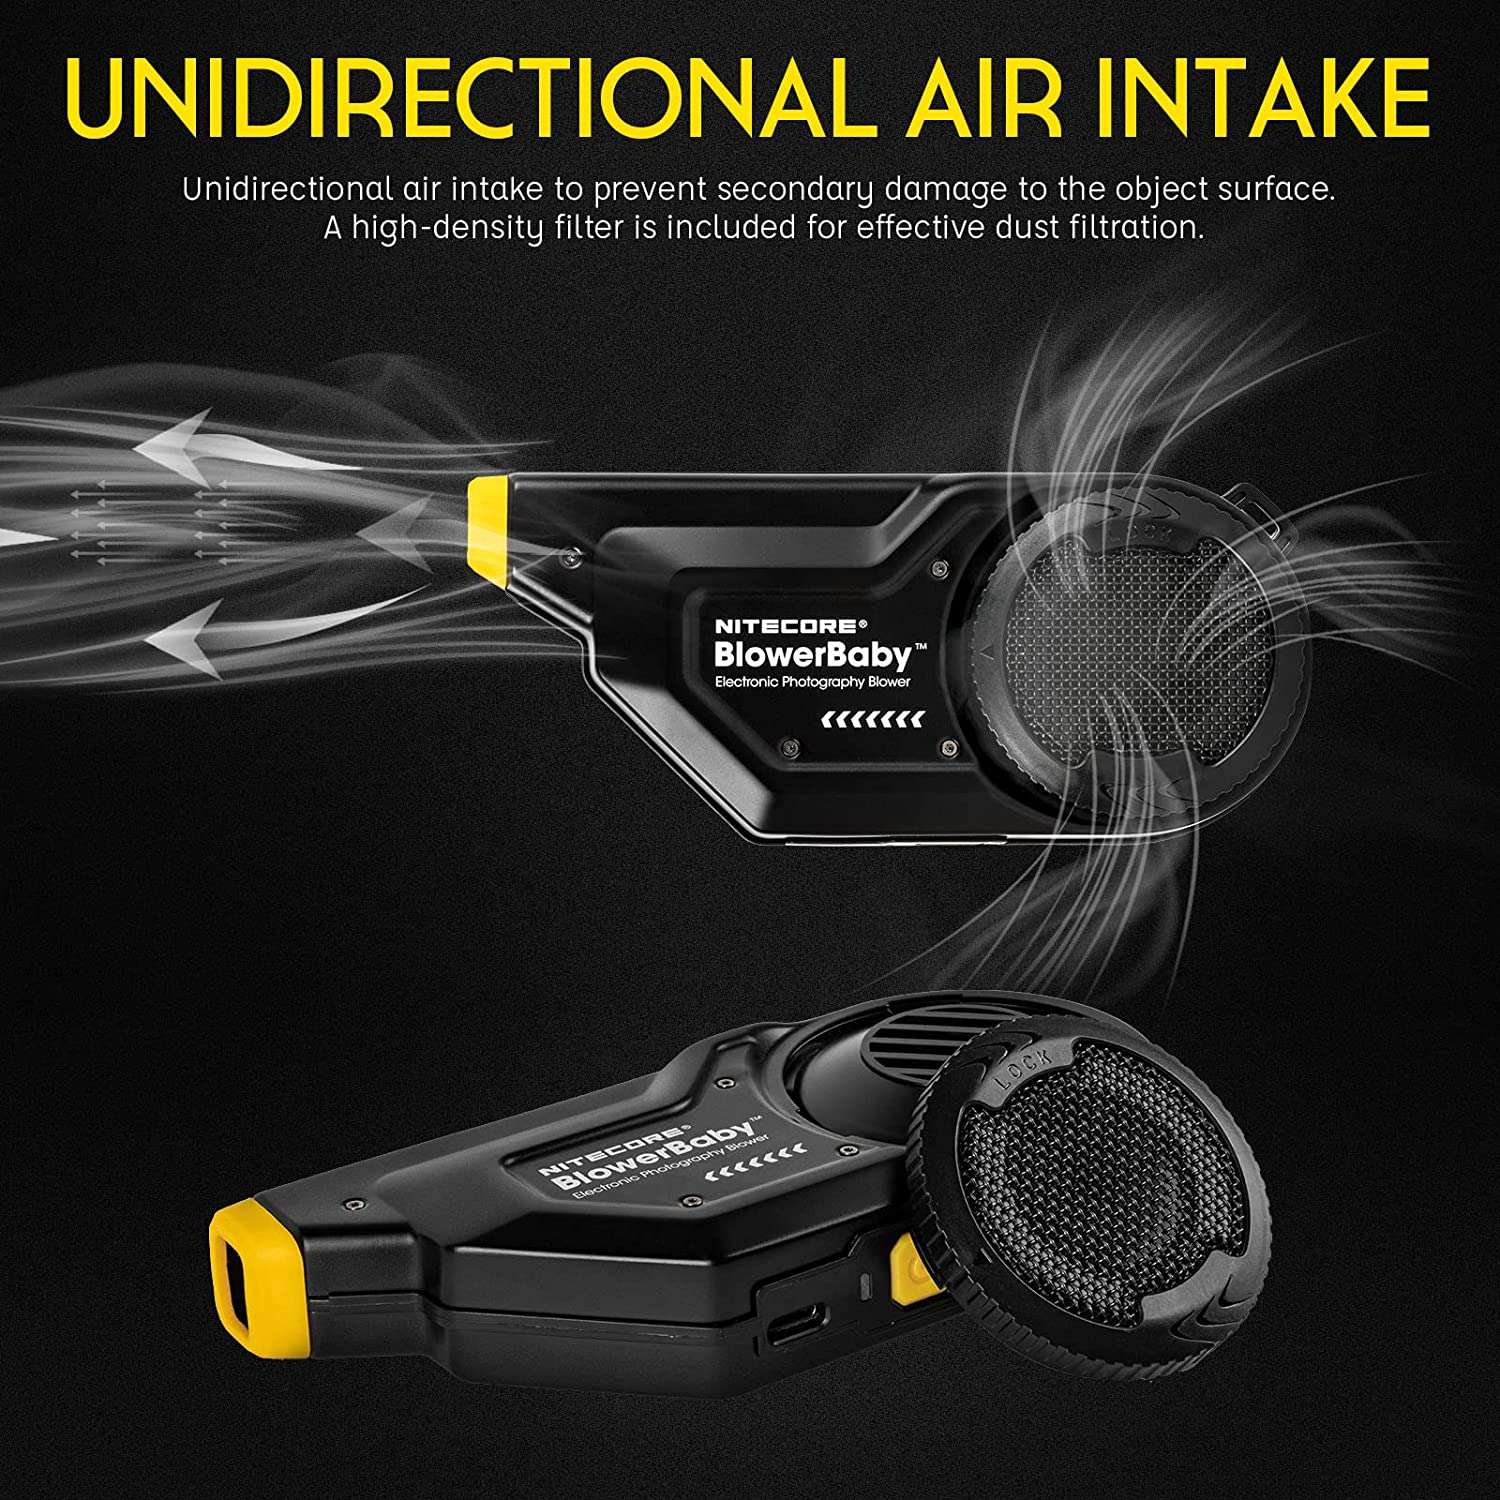 NITECORE BLOWERBABY USB-C RECHARGEABLE CAMERA DUSTER